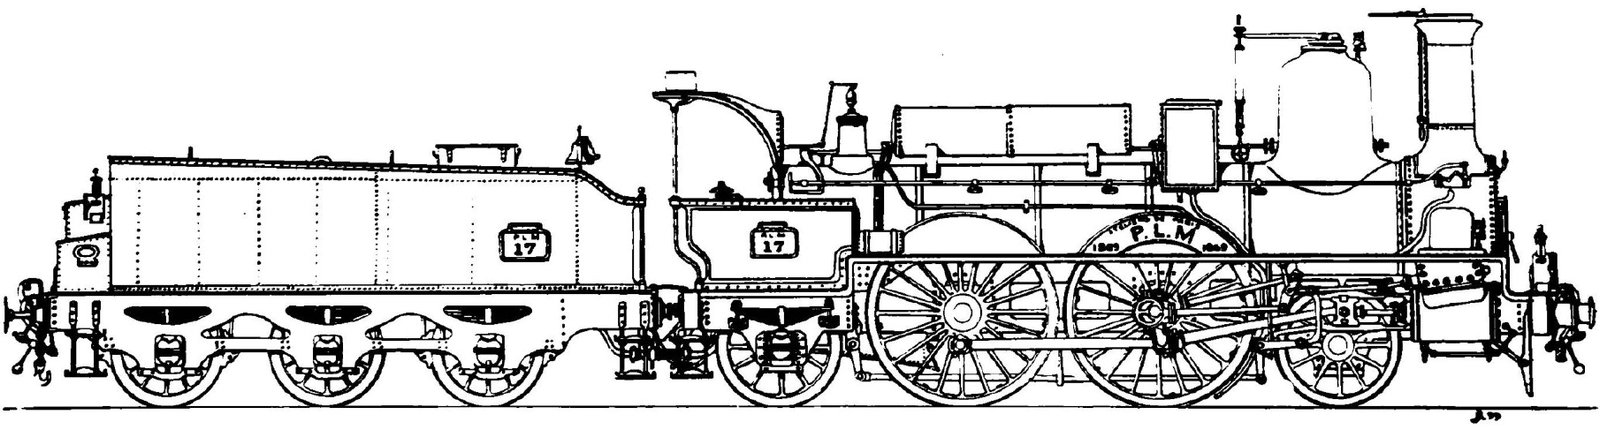 Locomotive of the Paris-Lyon-Méditerranée from 1868, which was only later given a trailing axle